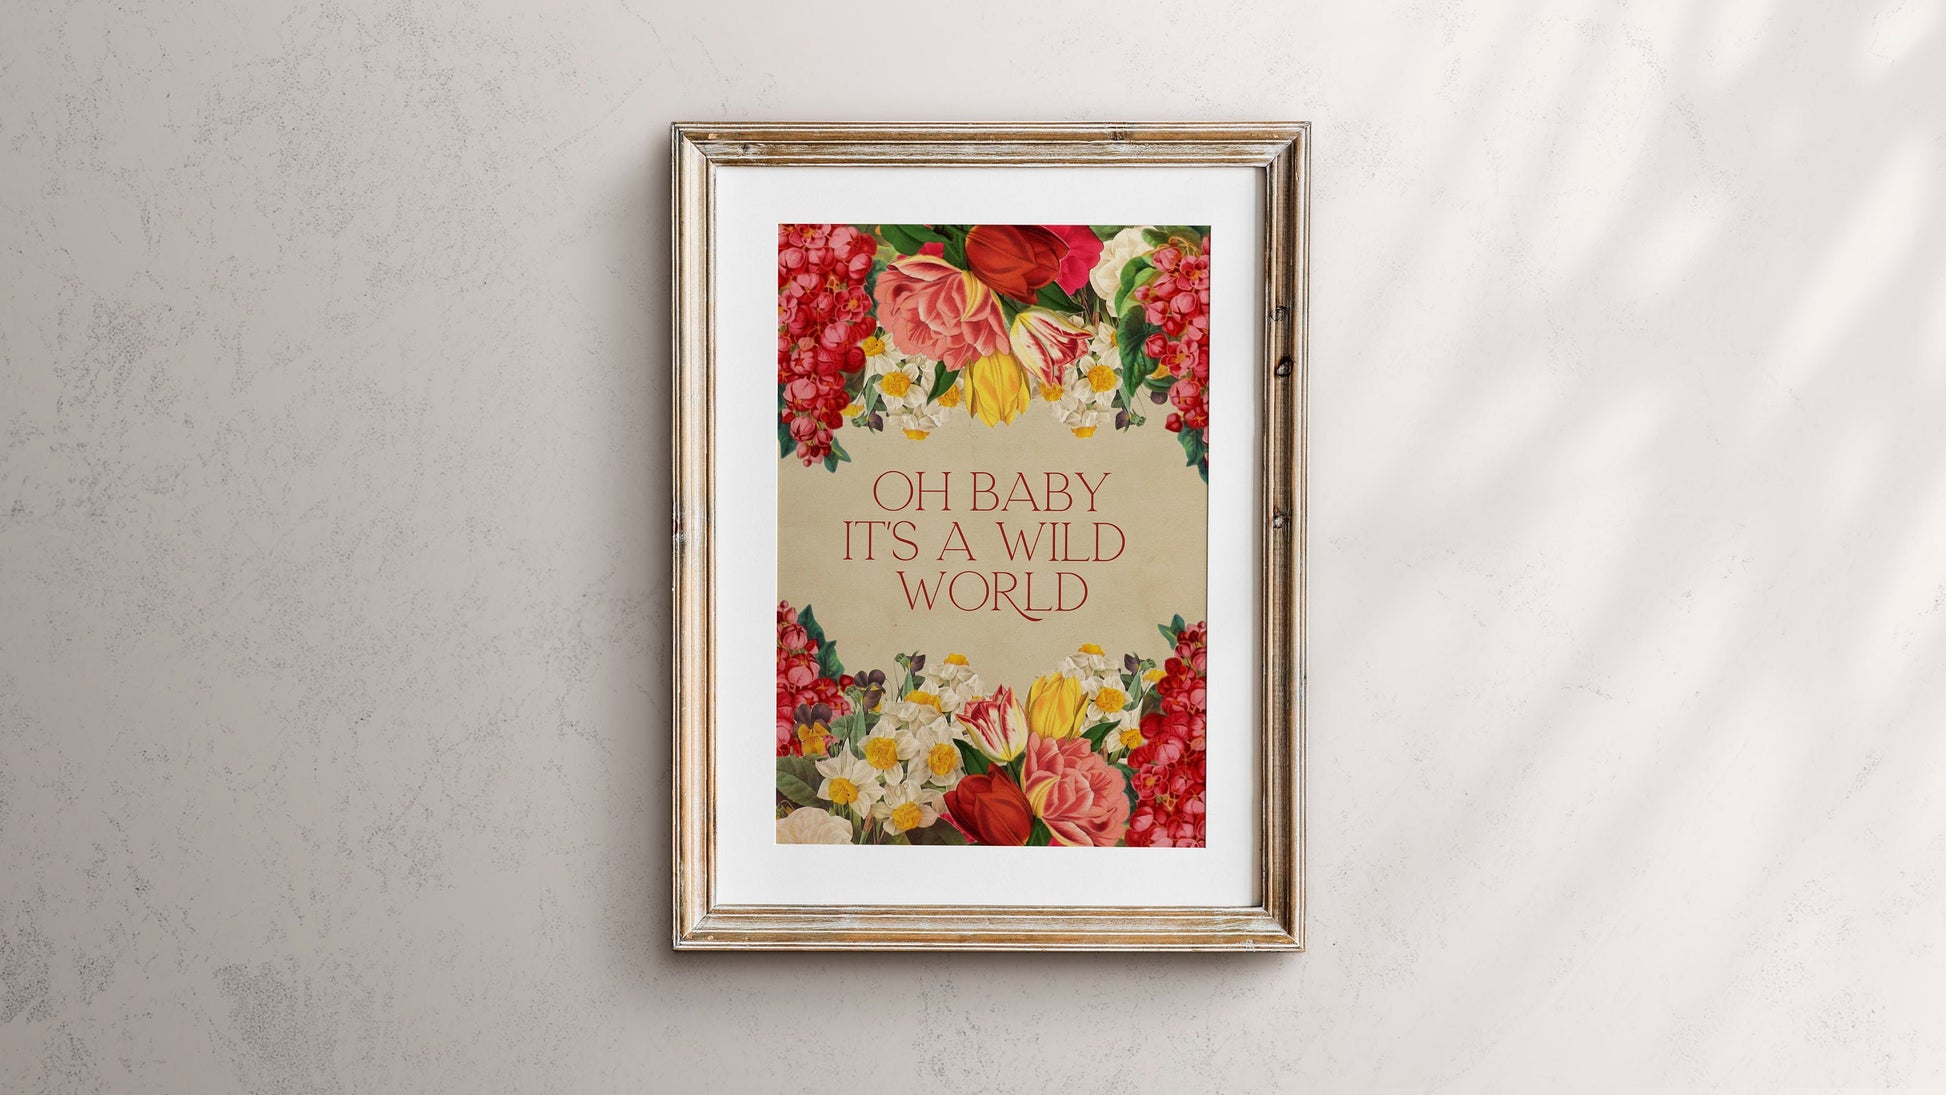 Oh Baby It's A Wild World Print, Floral Prints, Wild Flowers, Floral Decor, Be Wild Quote, Happy Quote, Lyric Prints, Music Inspired Prints